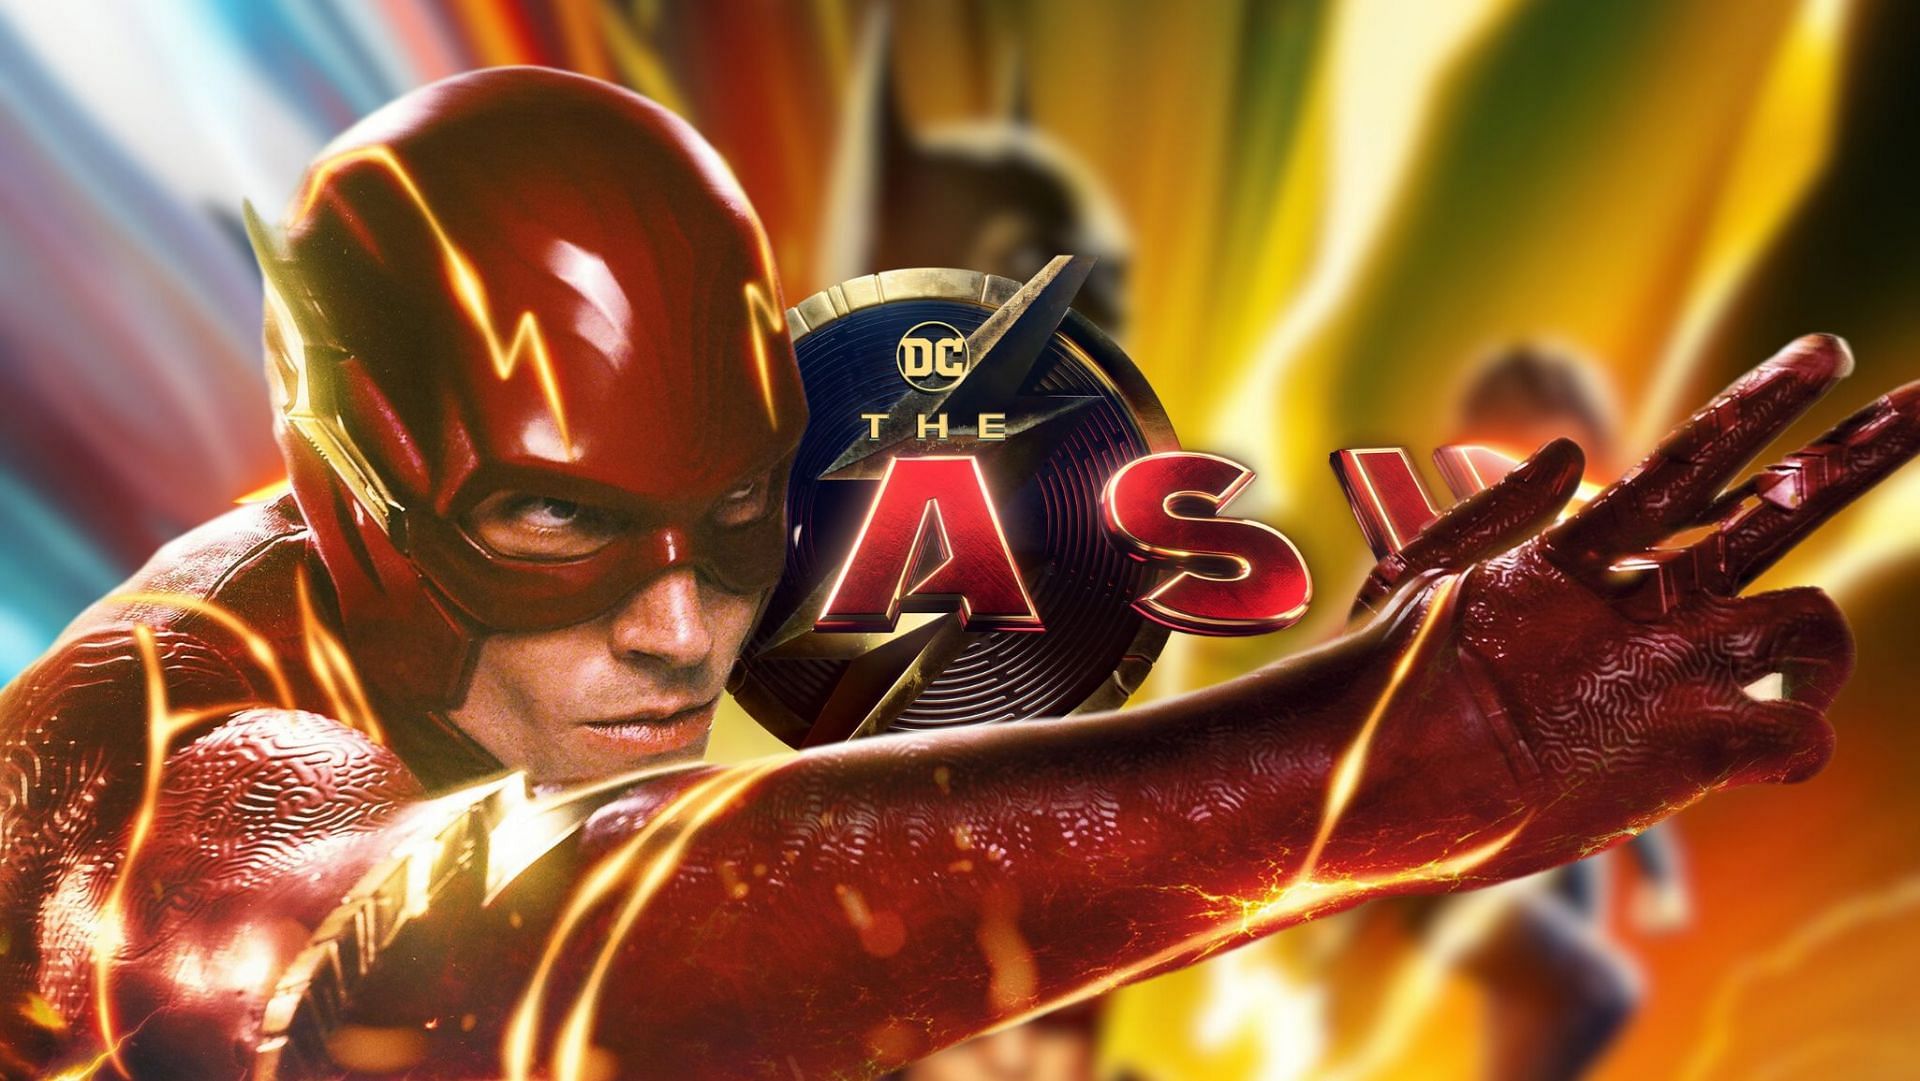 A stopwatch on time: The fate of The Flash sequel hangs in the balance (Image via Sportskeeda)